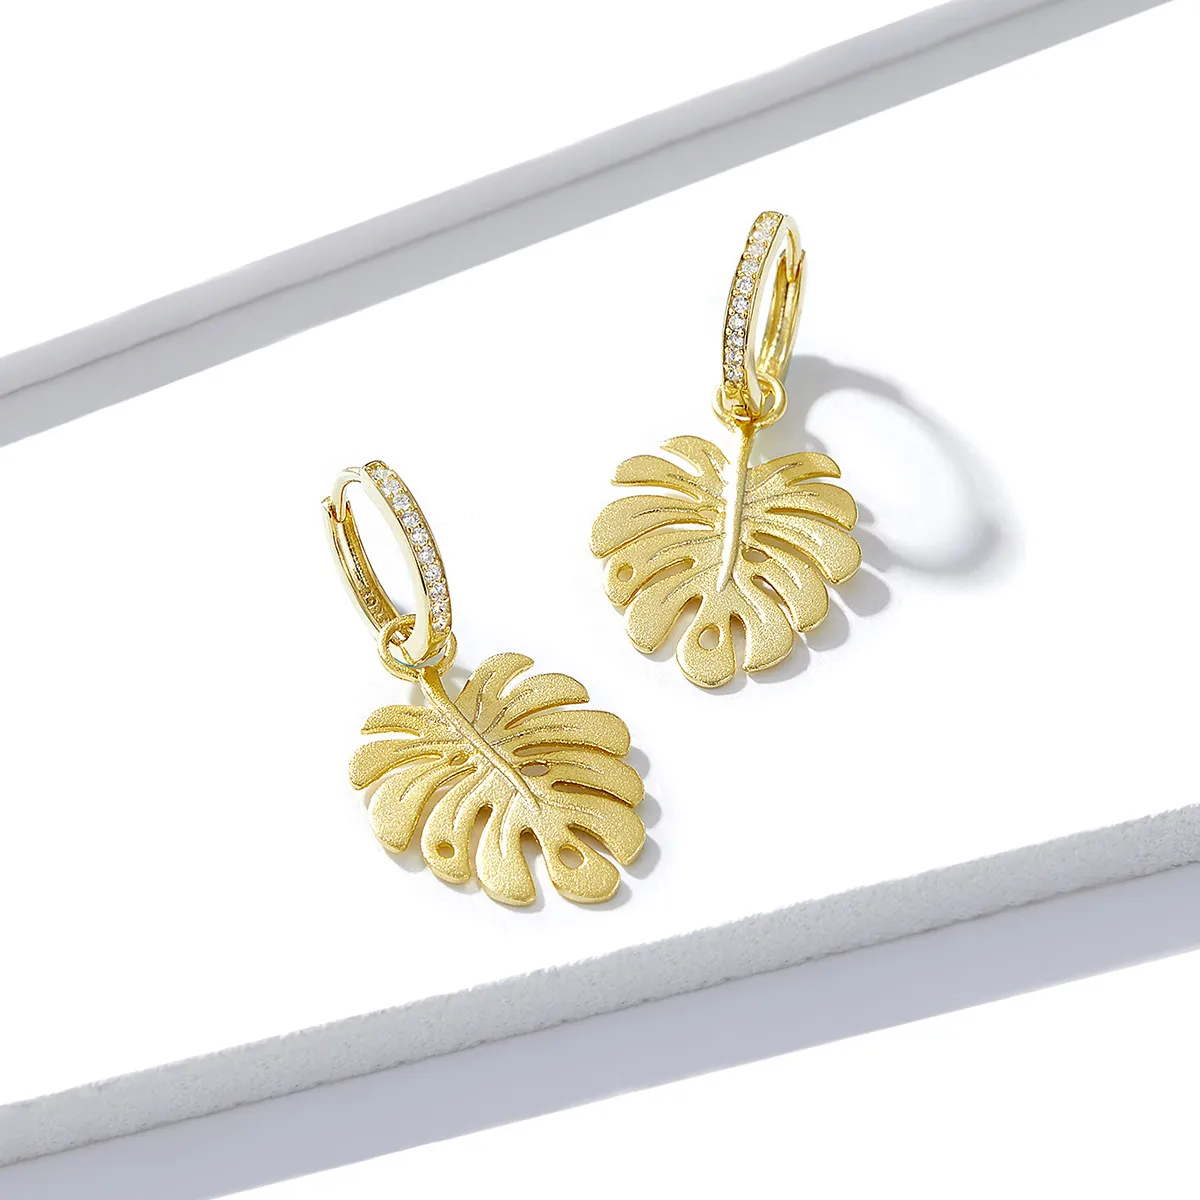 Pandora Style 18ct Gold Plated Monstera Leaf Dangle Earrings - BSE223